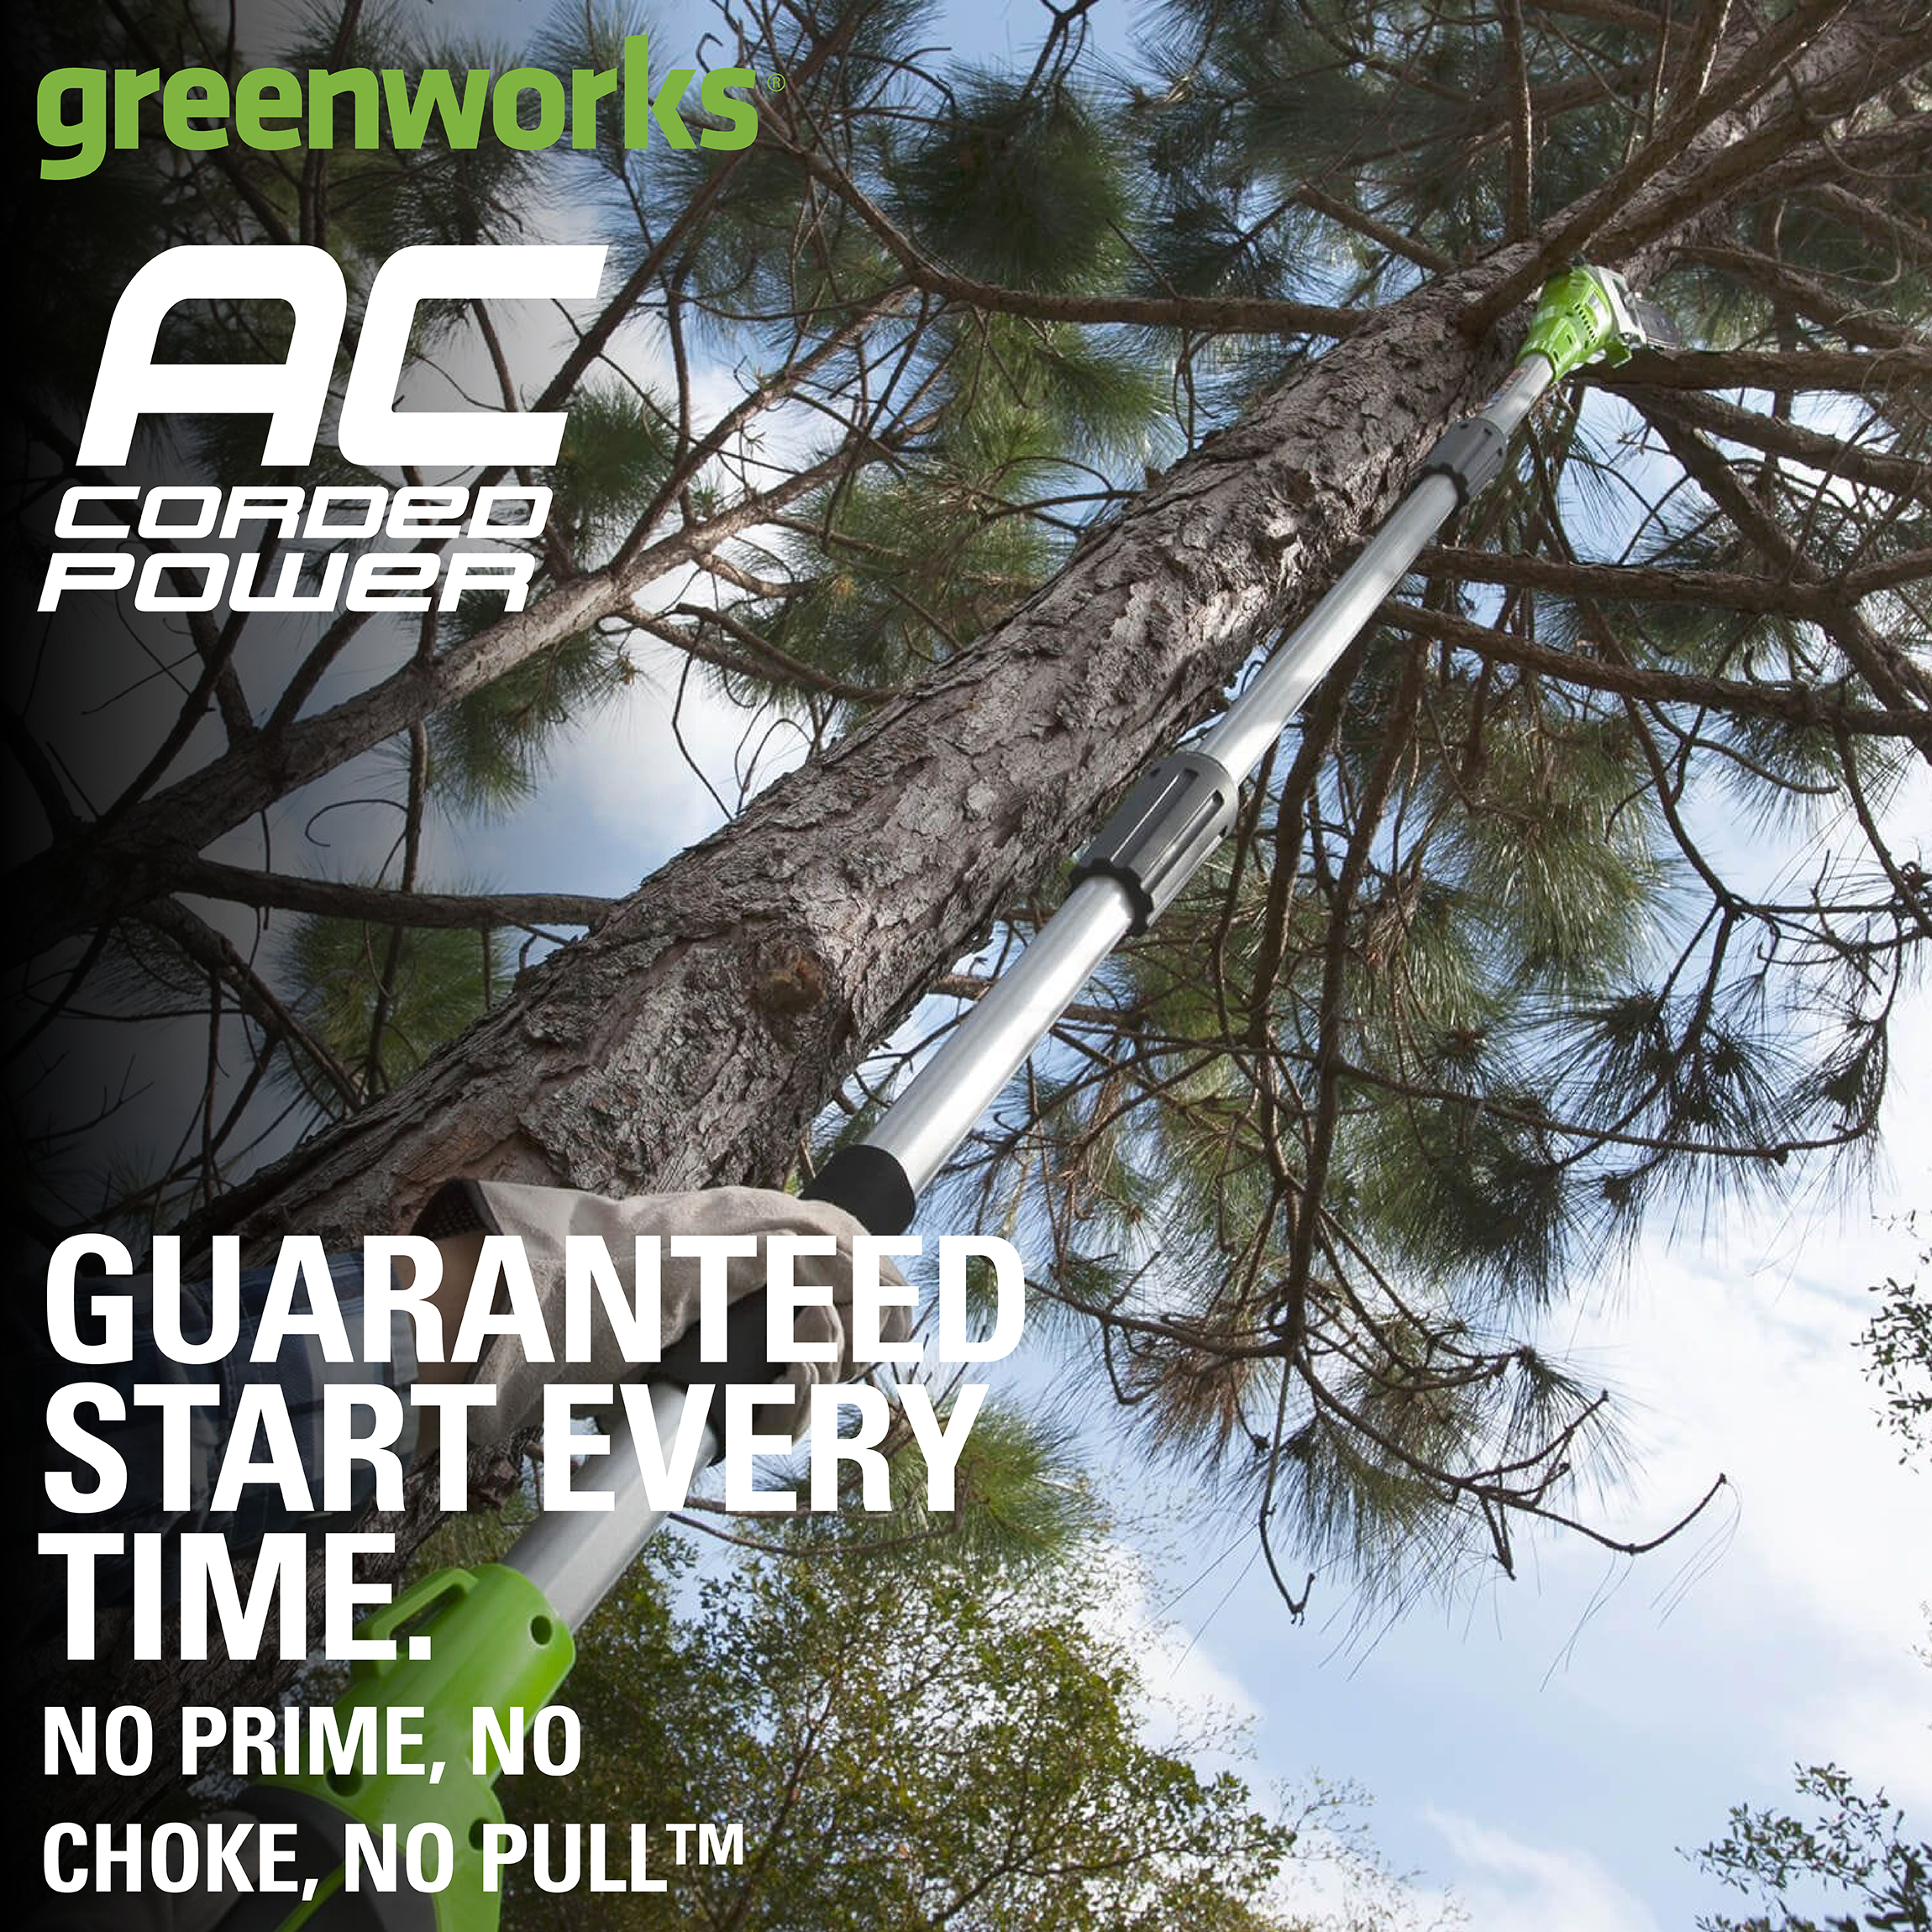 Greenworks 65 Amp 8-Inch Corded Electric Pole Saw, 20192 - image 3 of 10